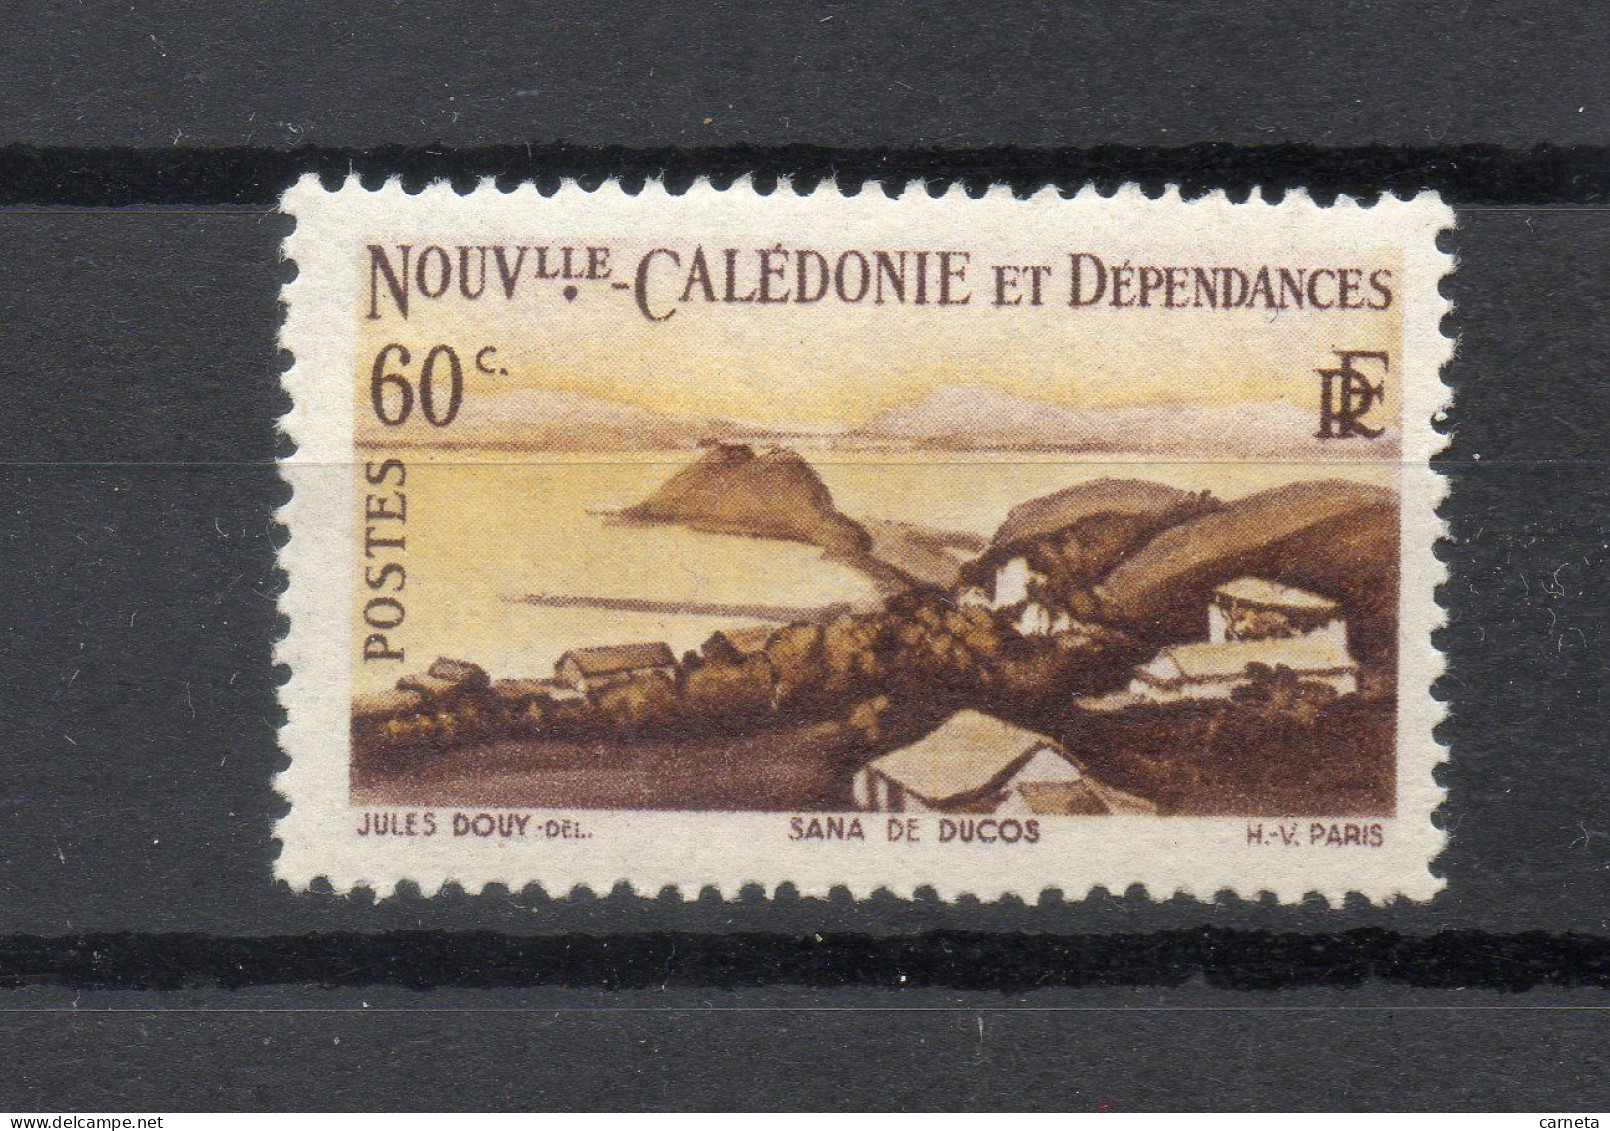 Nlle CALEDONIE N° 263   NEUF AVEC CHARNIERE COTE  0.75€   PAYSAGE - Nuevos